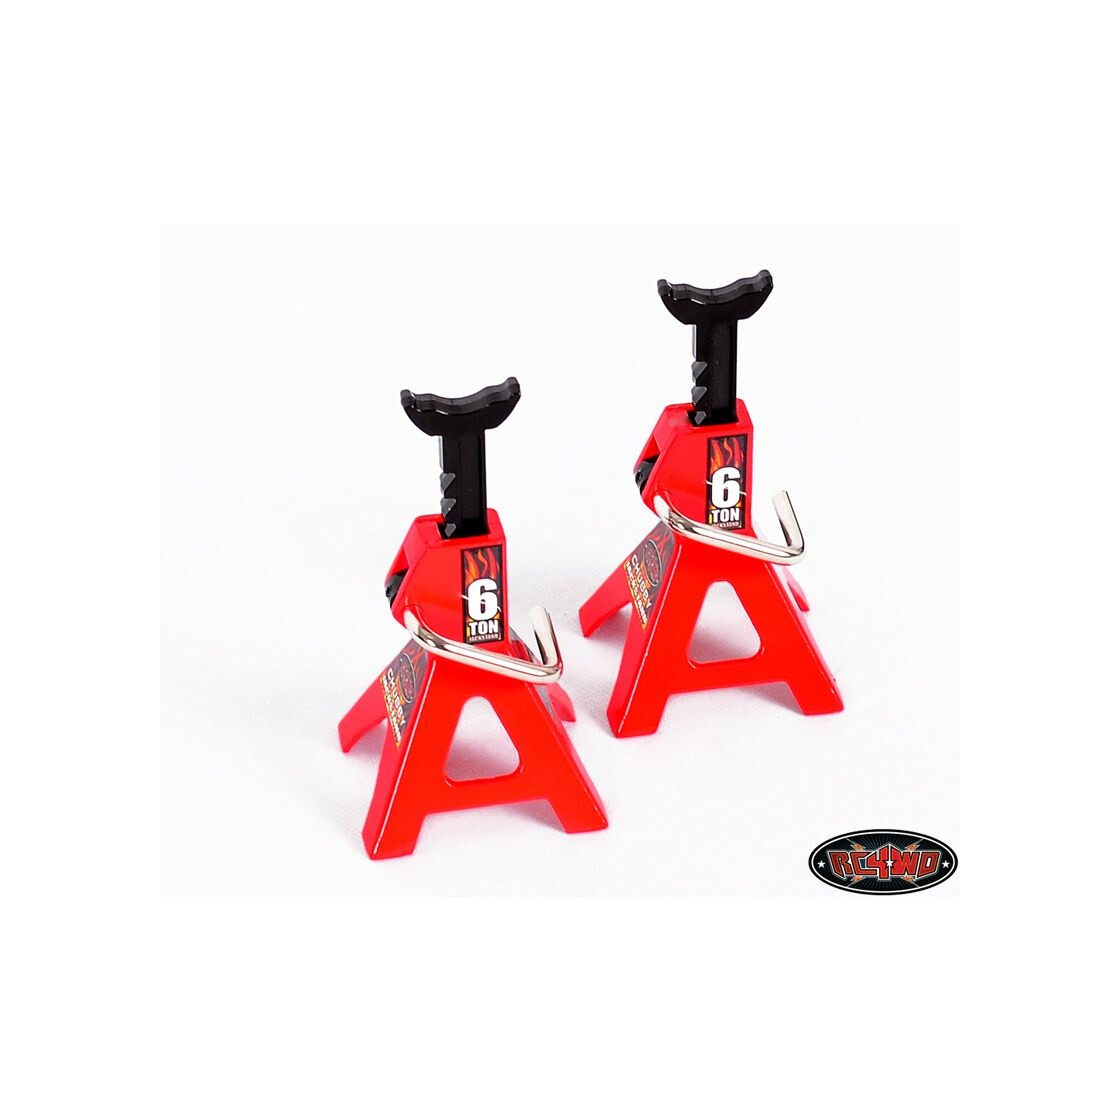 Chubby 6 TON Scale Jack Stands